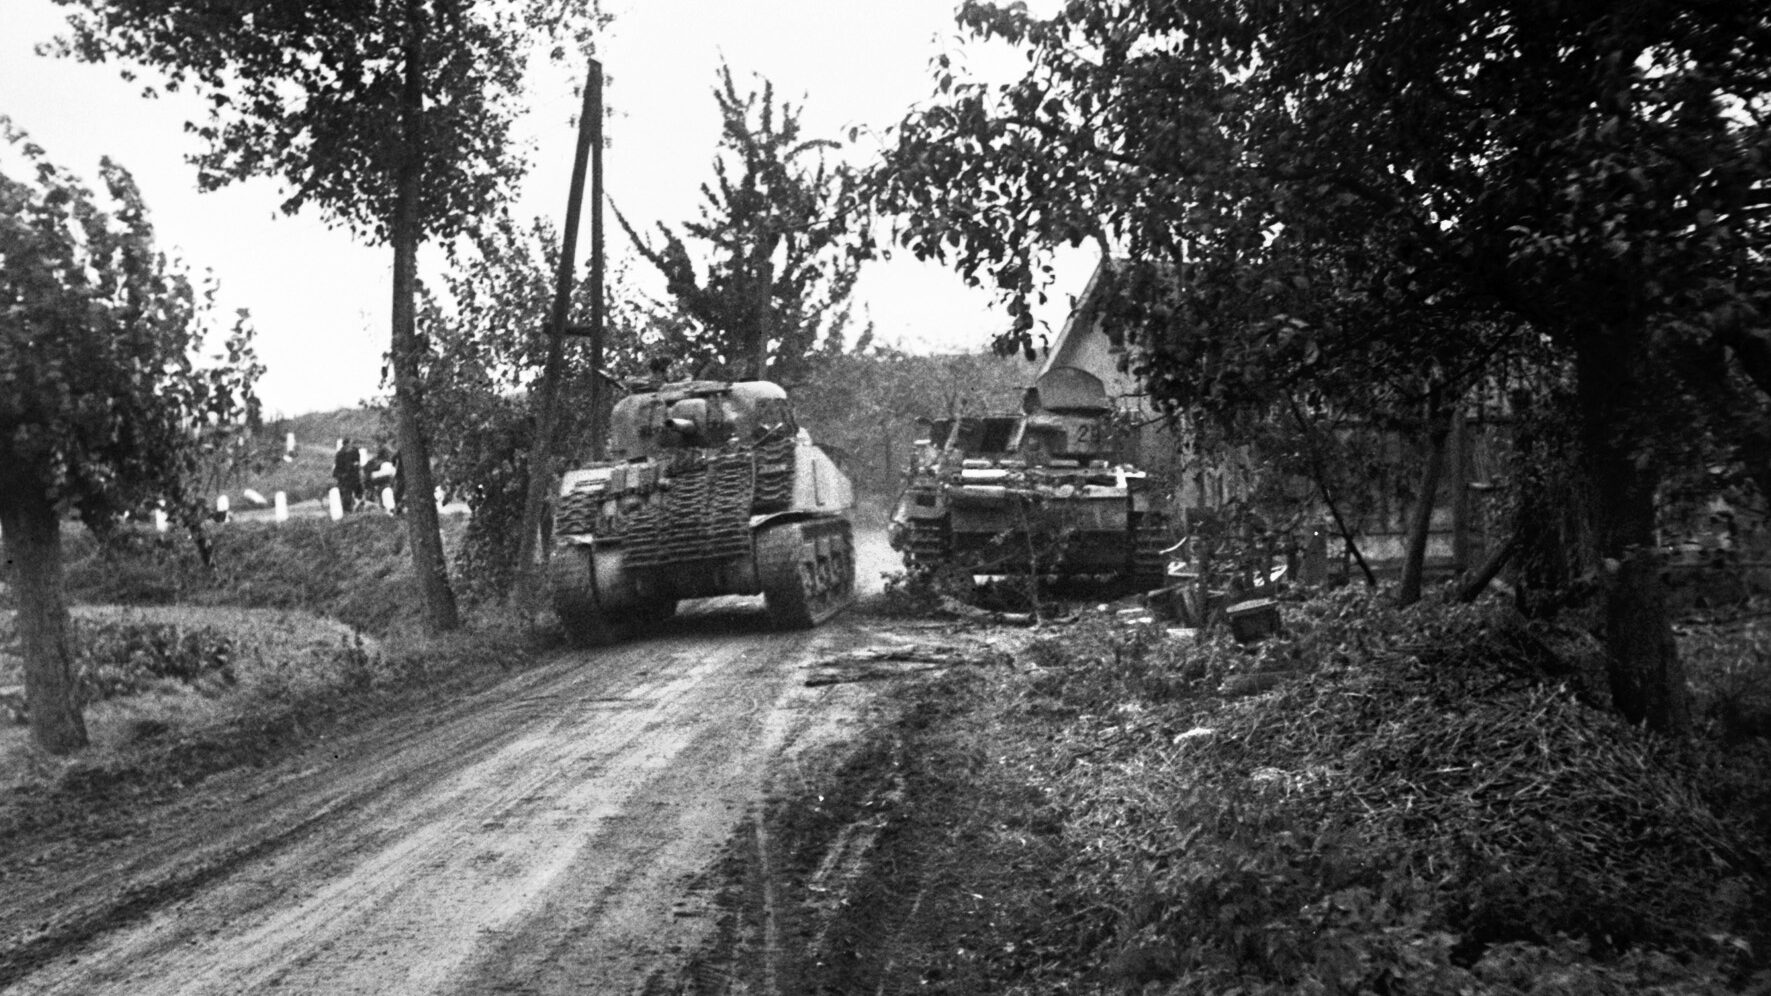 British and German armor clashed on the approach to Nijmegen 12 miles south of Arnhem. Pictured is a Sherman tank of the British 4th/7th Royal Dragoon Guards passing a knocked-out Panzer III. 